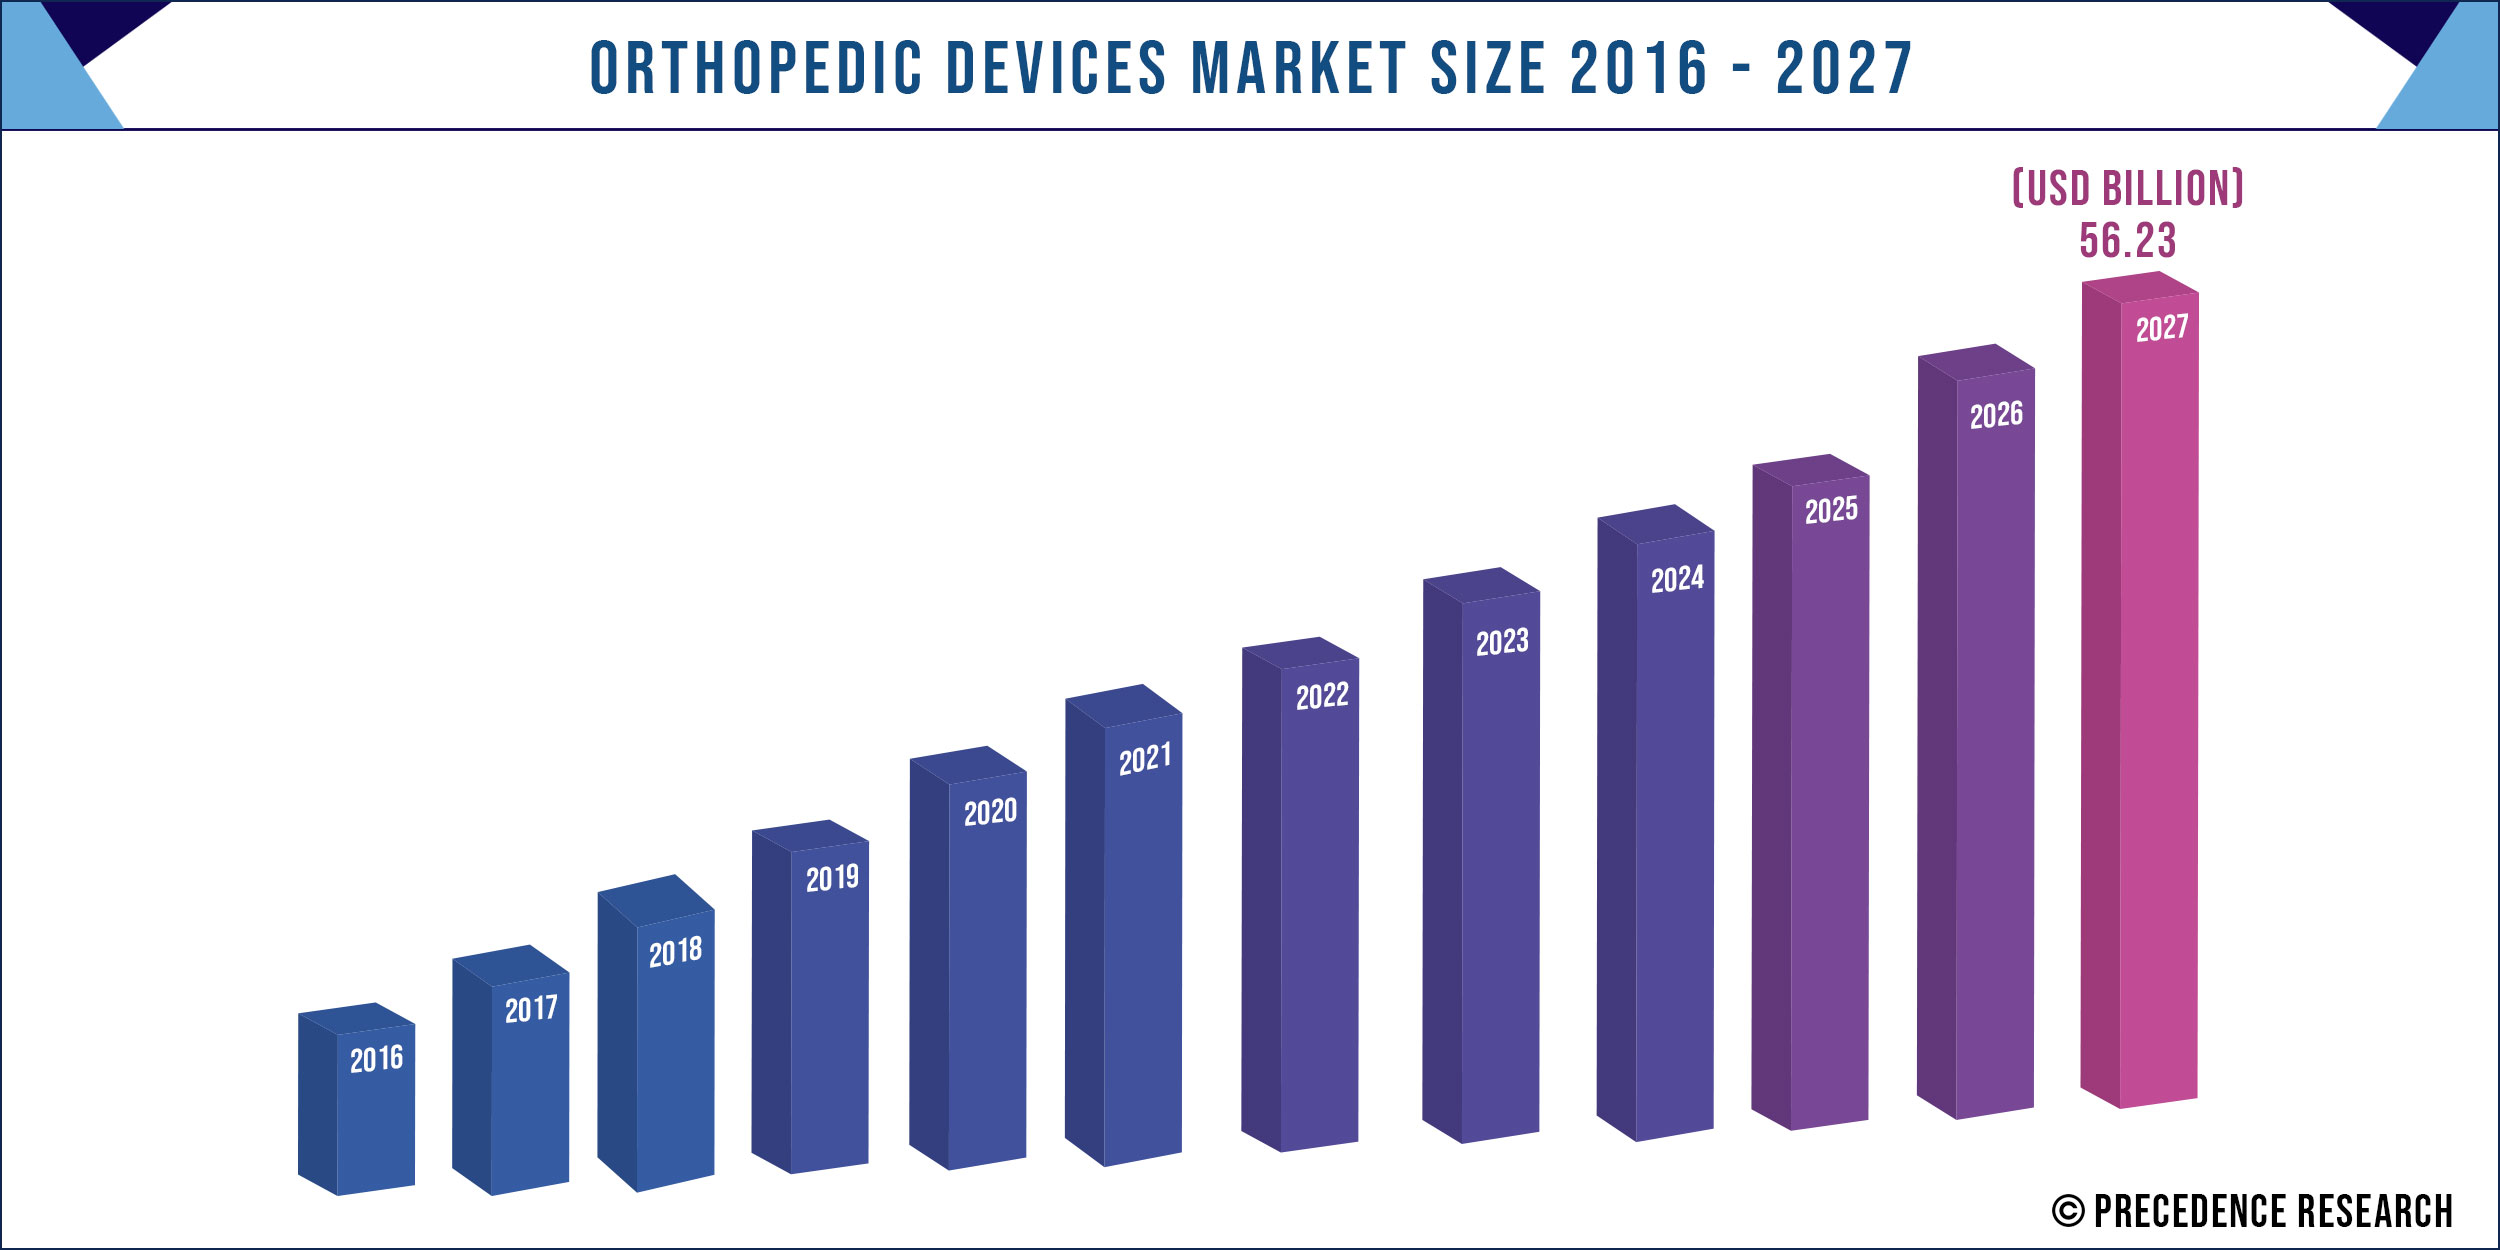 Orthopedic Devices Market to Exceed US$ 56.23 Bn by 2027